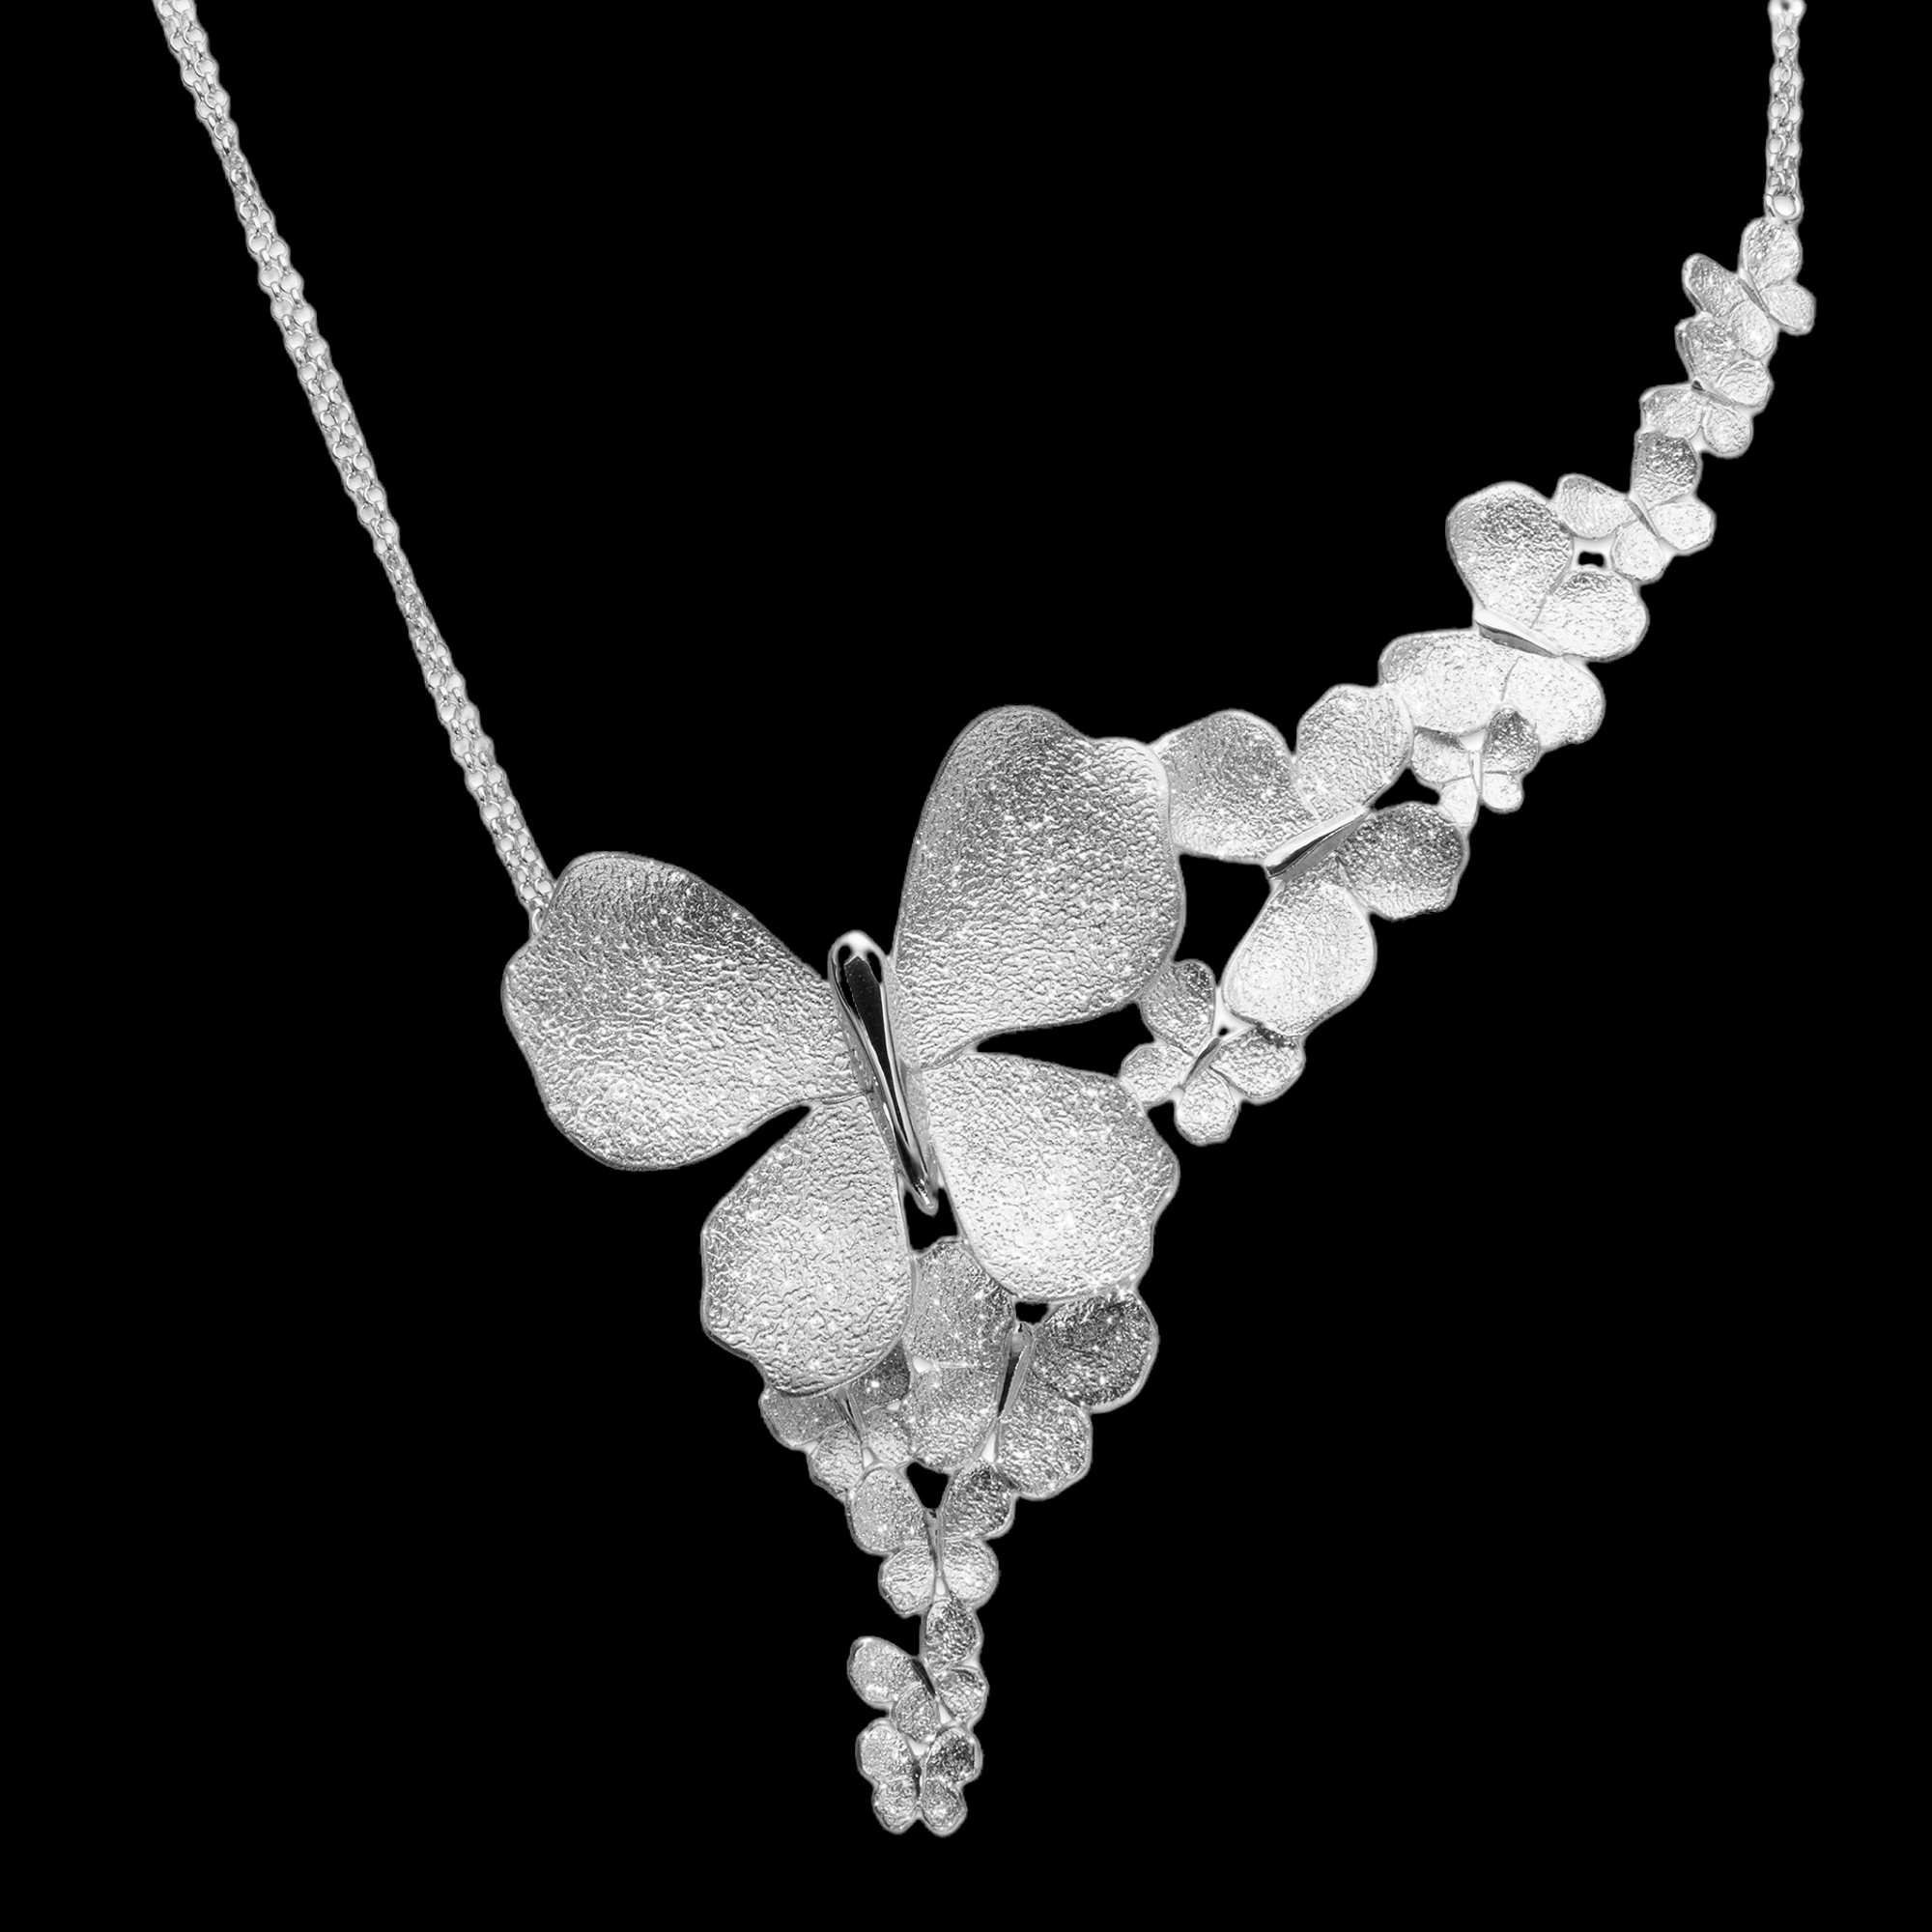 Silver necklace with a few butterflies